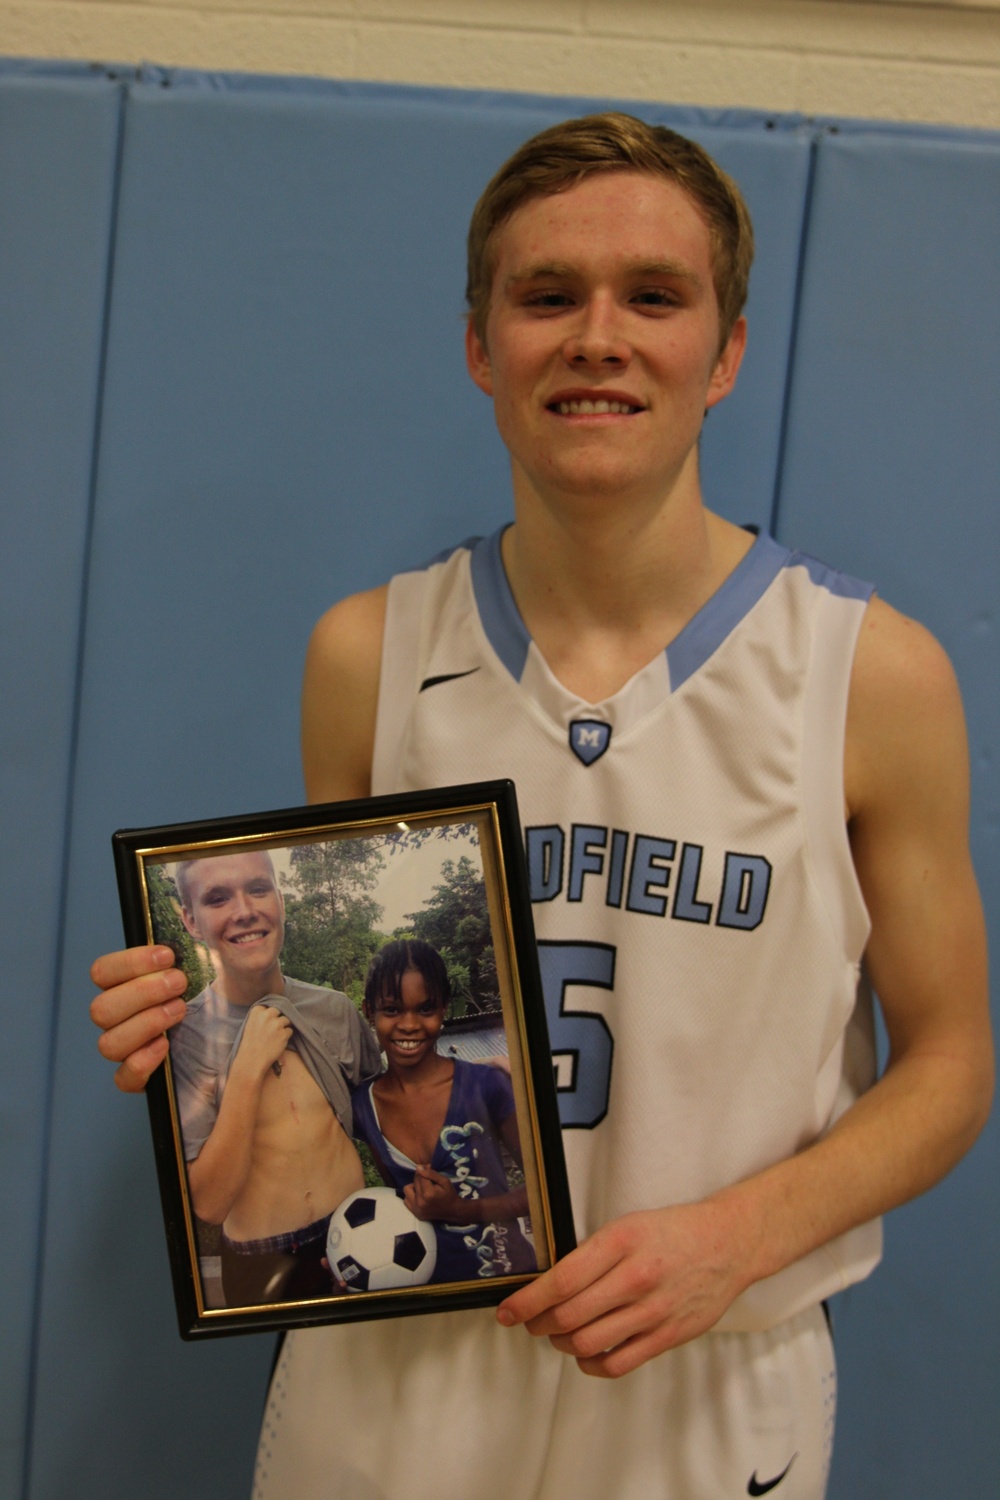 Medfield HS senior given Sports Illustrated award from SI, Marines